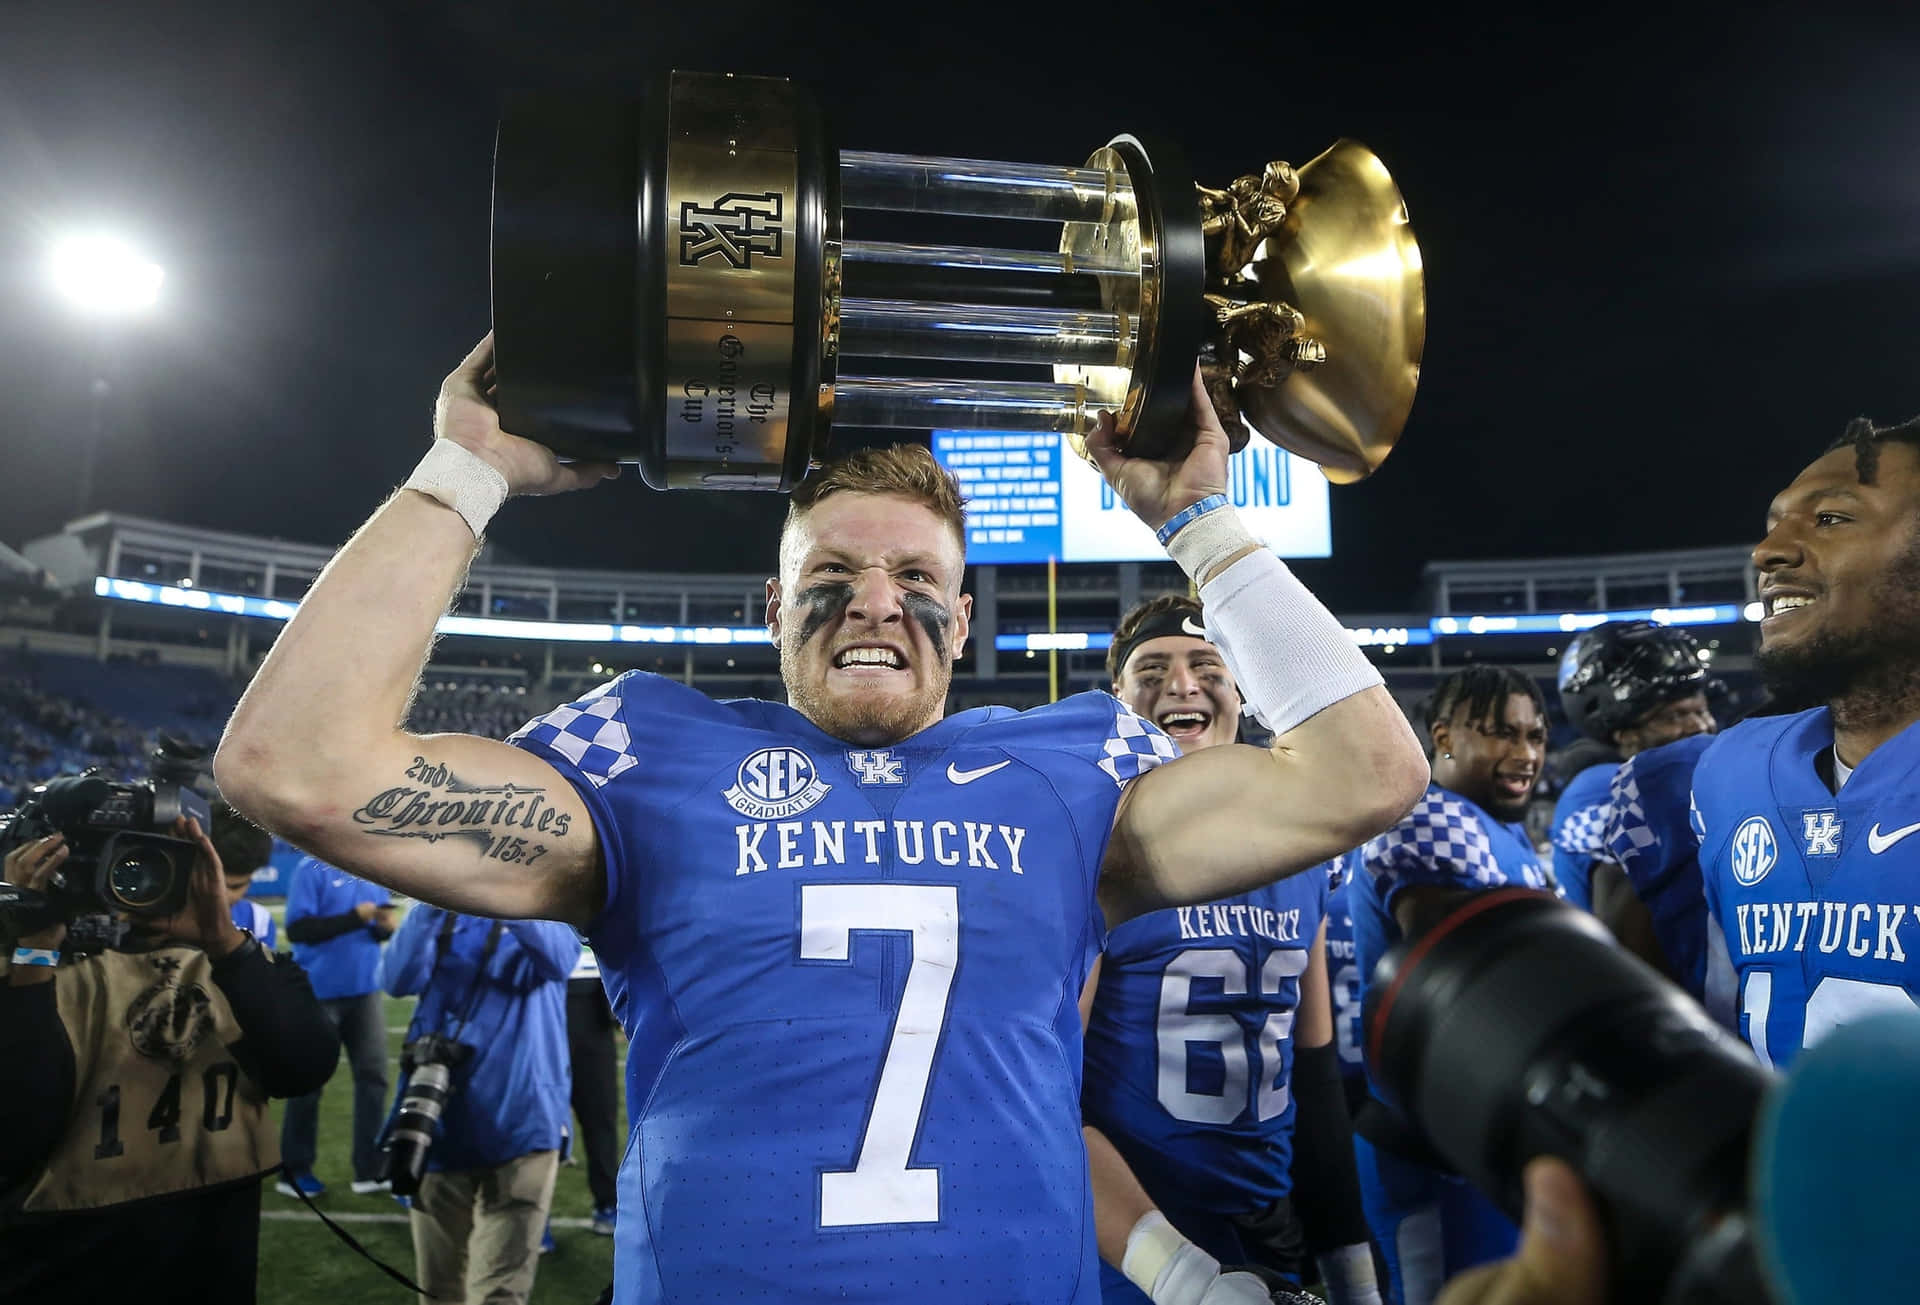 Kentucky Football Player Celebrates Victory With Trophy Wallpaper